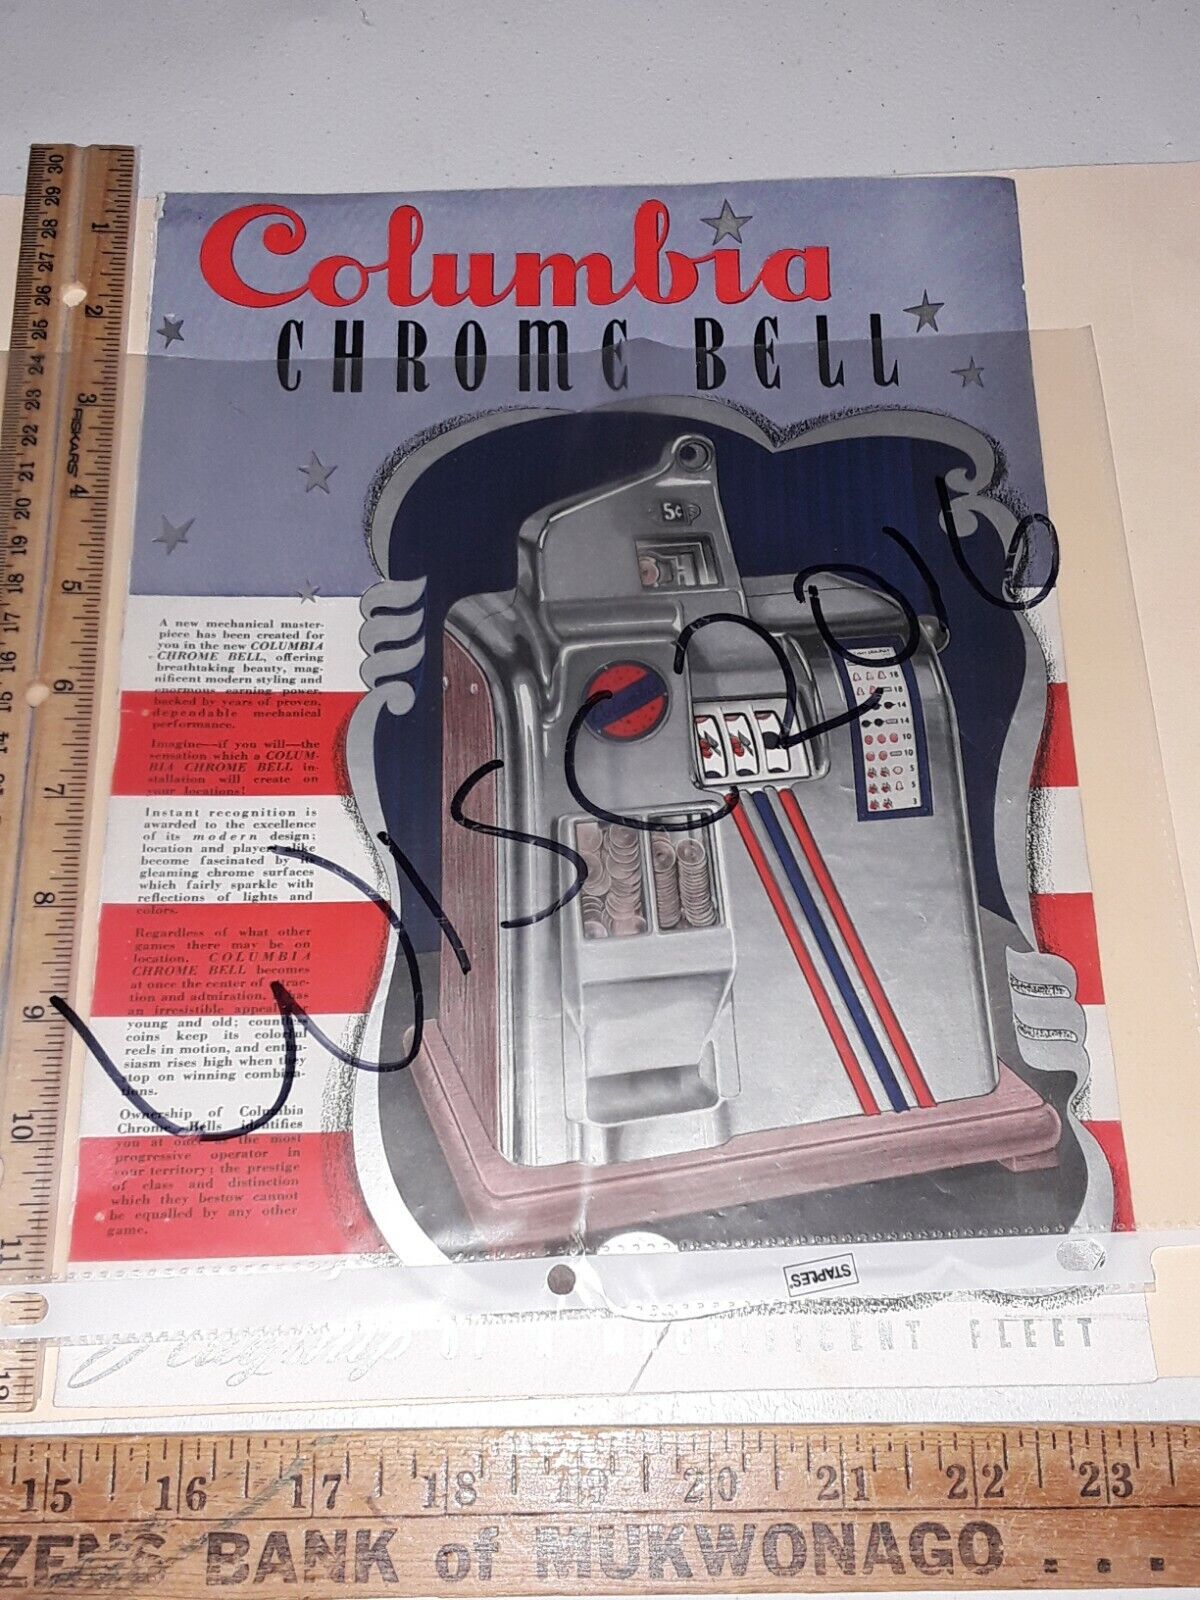 Columbia Chrome Bell Slot Machine Coin-Op Promo Flyer original 2 sided 